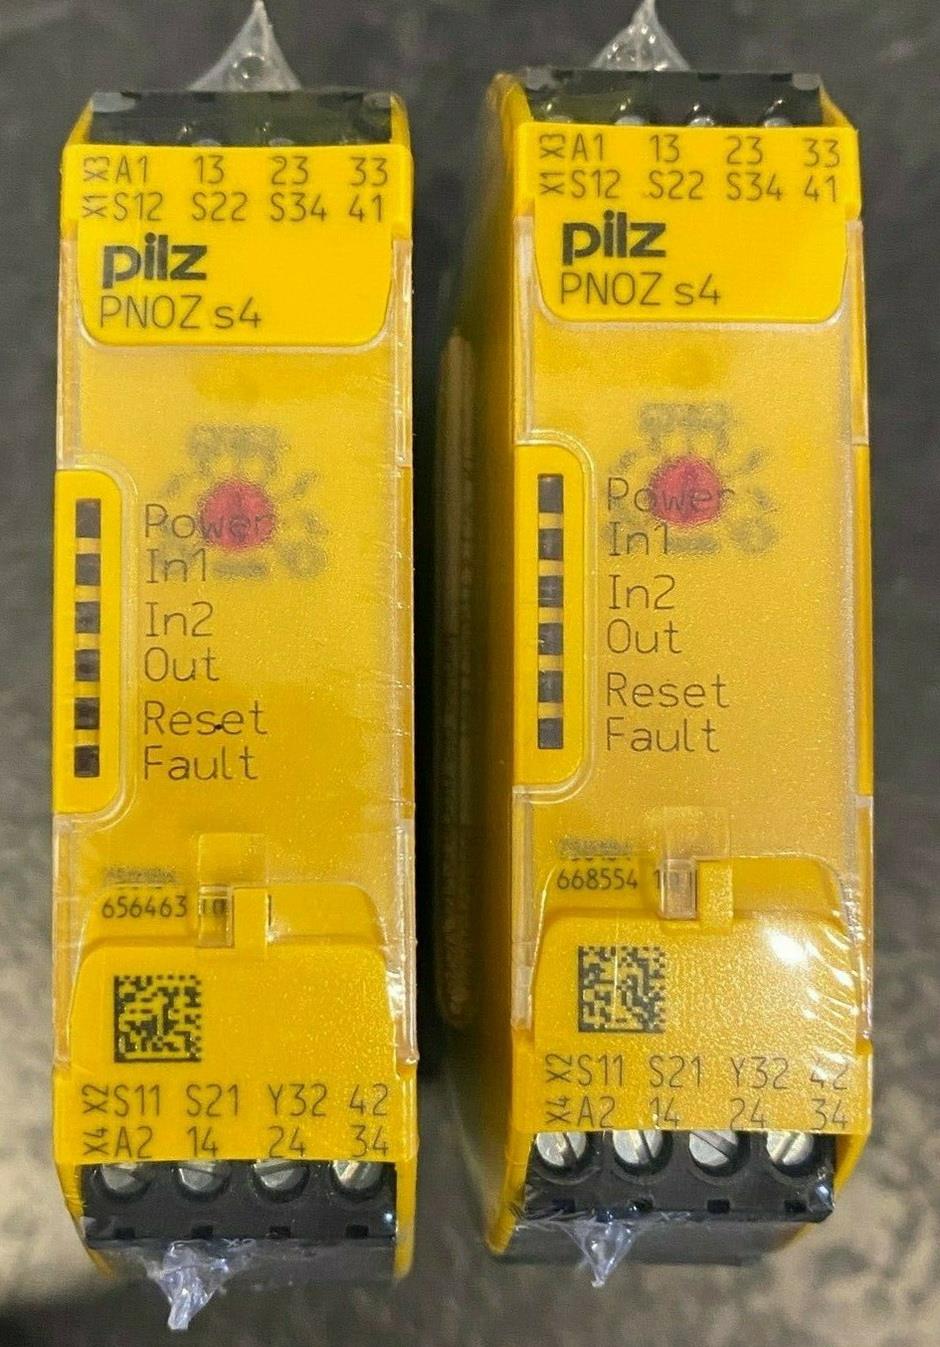 Pilz PN0Z-S4 Emergency Stop,Safety Relay, Configurable , Emergency Stop, Dual Channel, Pilz, PN0Z-S4,Pilz,Automation and Electronics/Electronic Components/Components